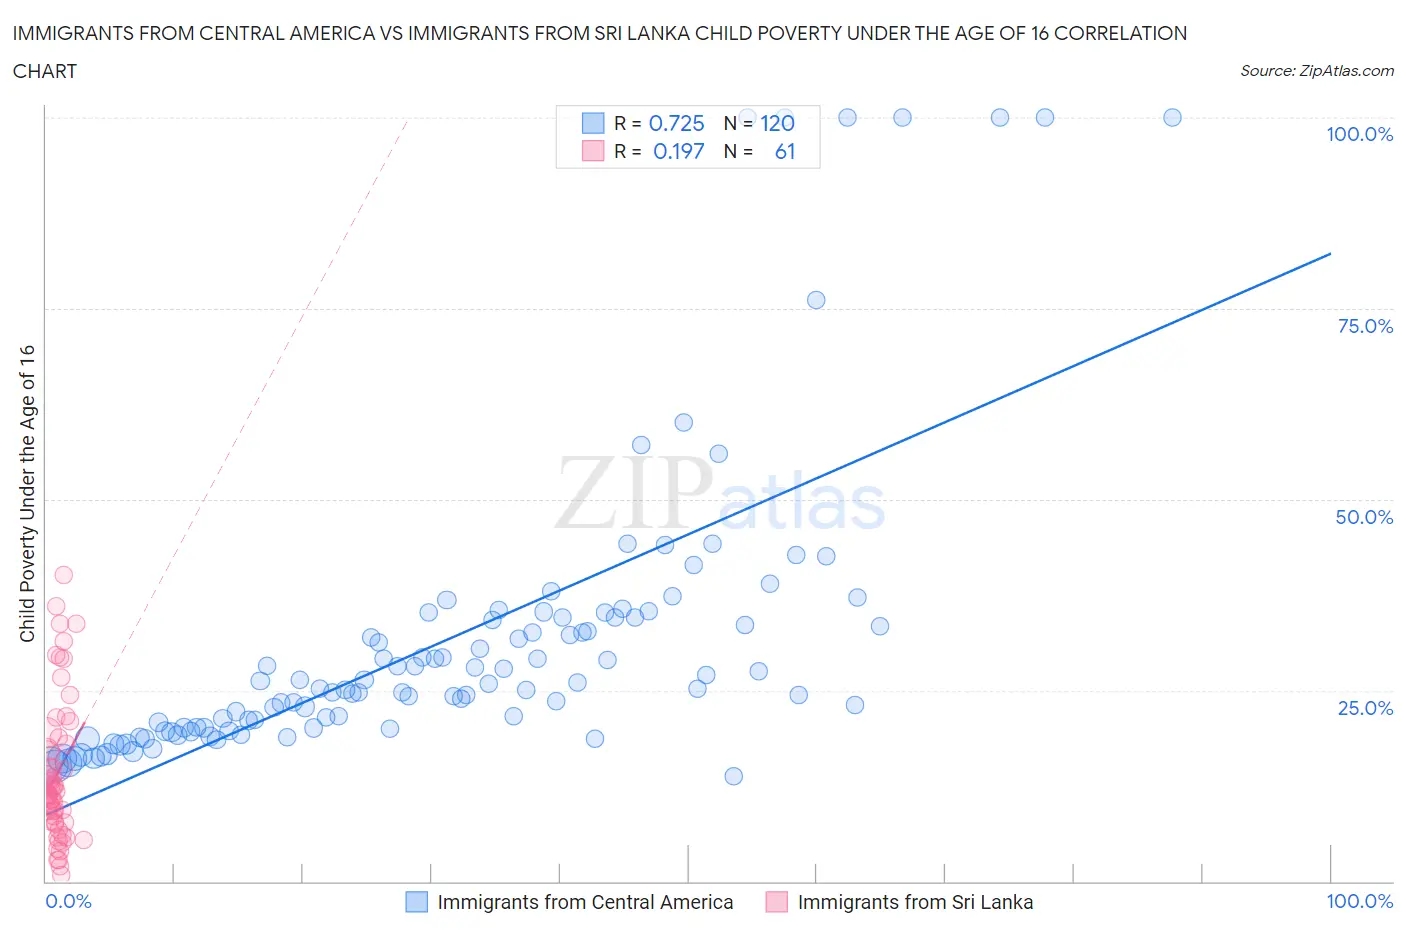 Immigrants from Central America vs Immigrants from Sri Lanka Child Poverty Under the Age of 16